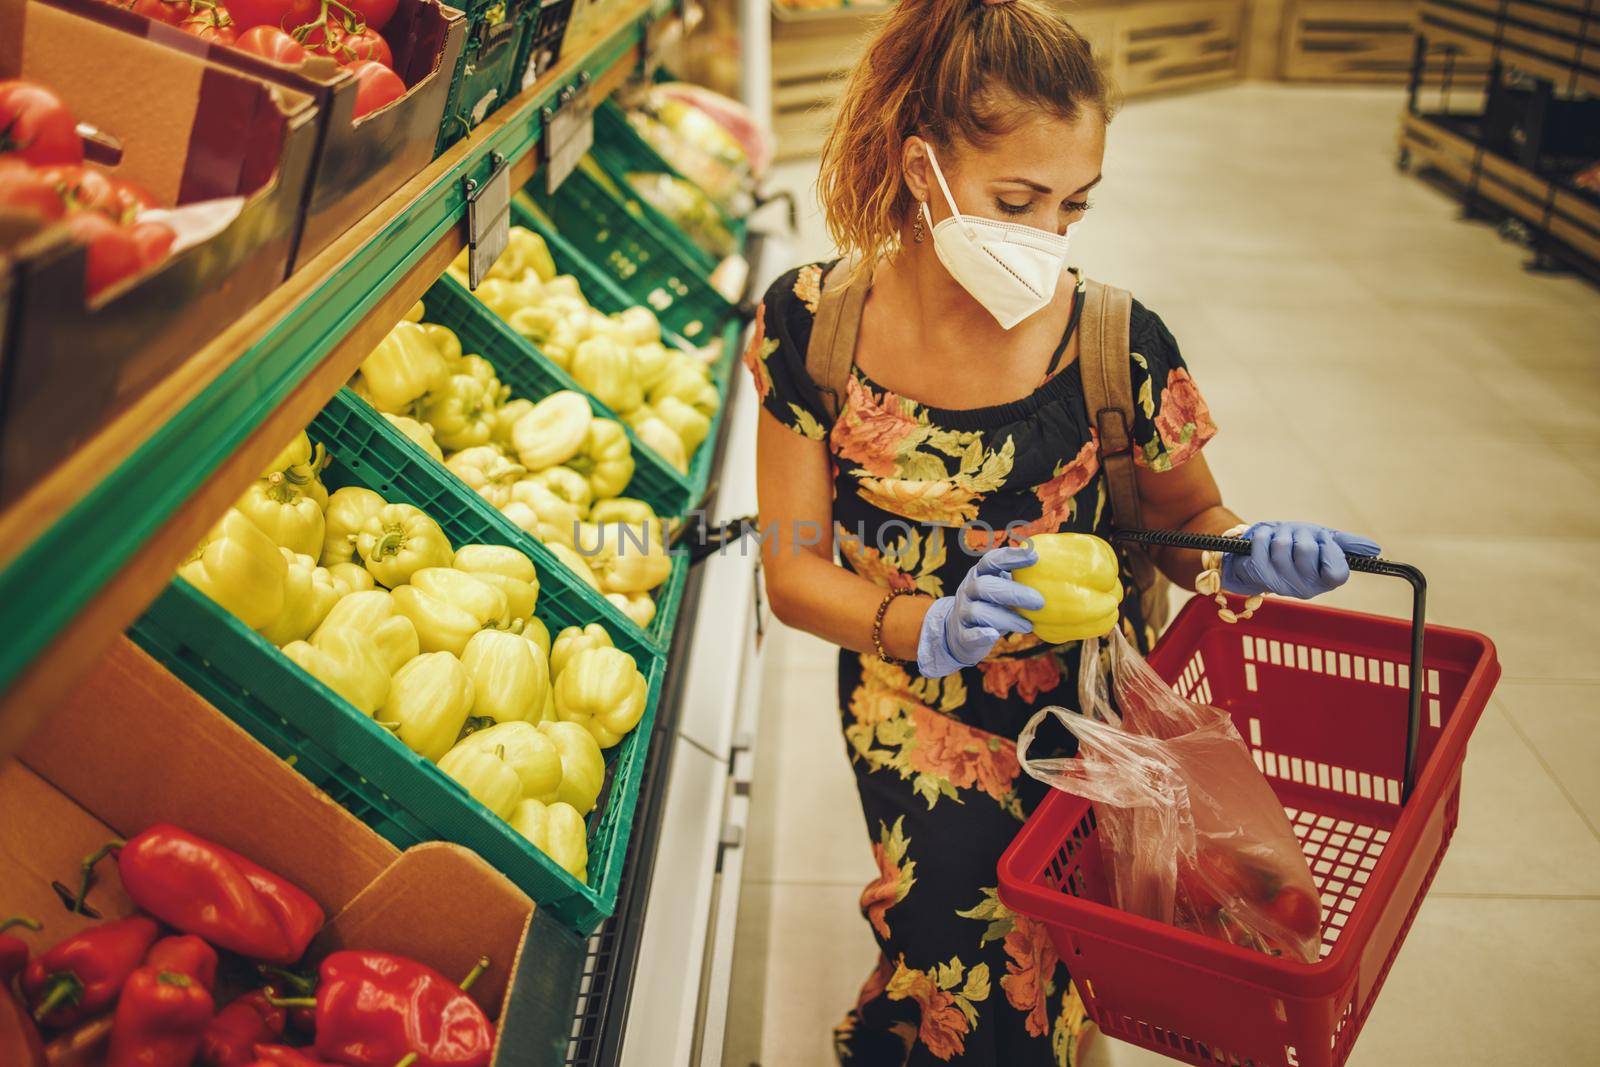 Shot of a young woman is wearing N95 protective mask while buying groceries in supermarket during Covid-19 pandemic.